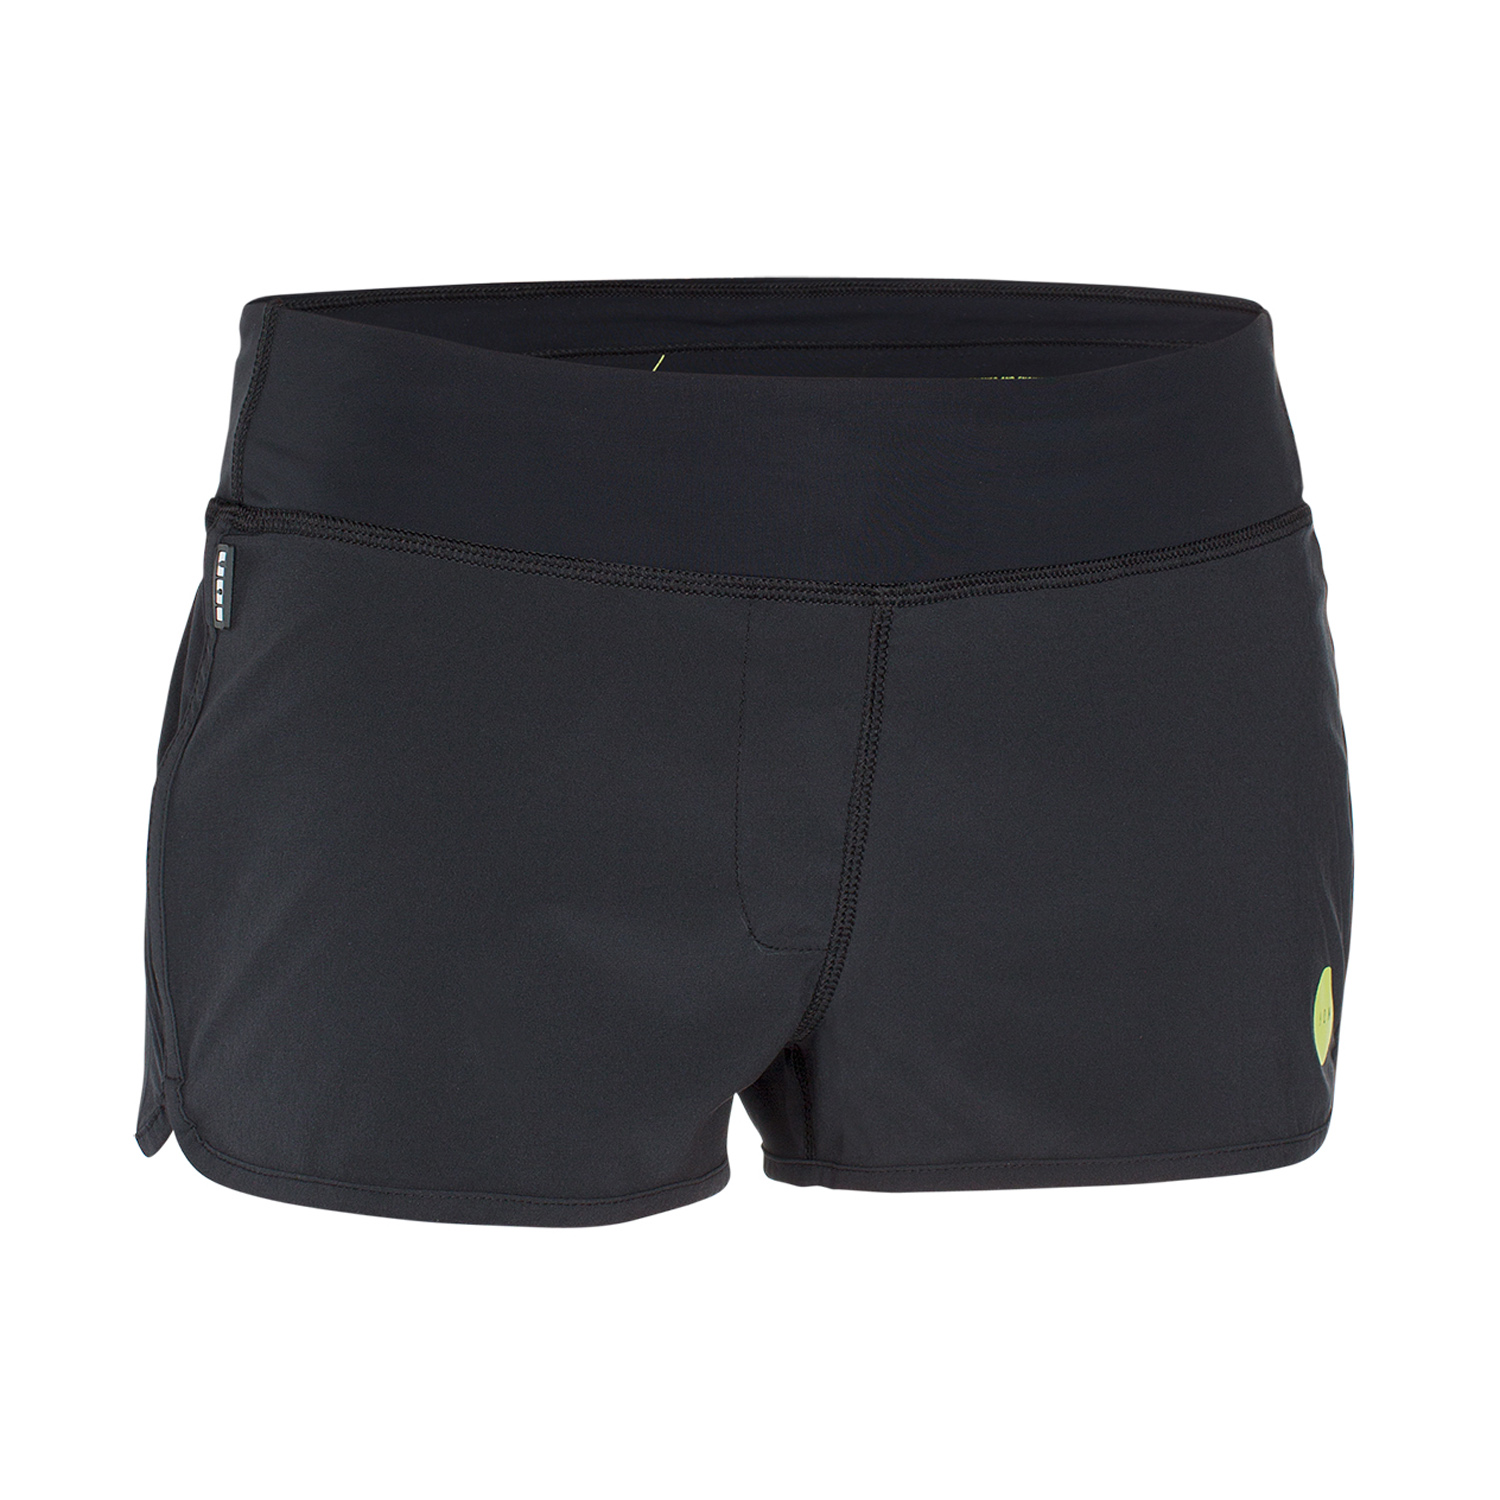 ION Femme Shorts Chica Black